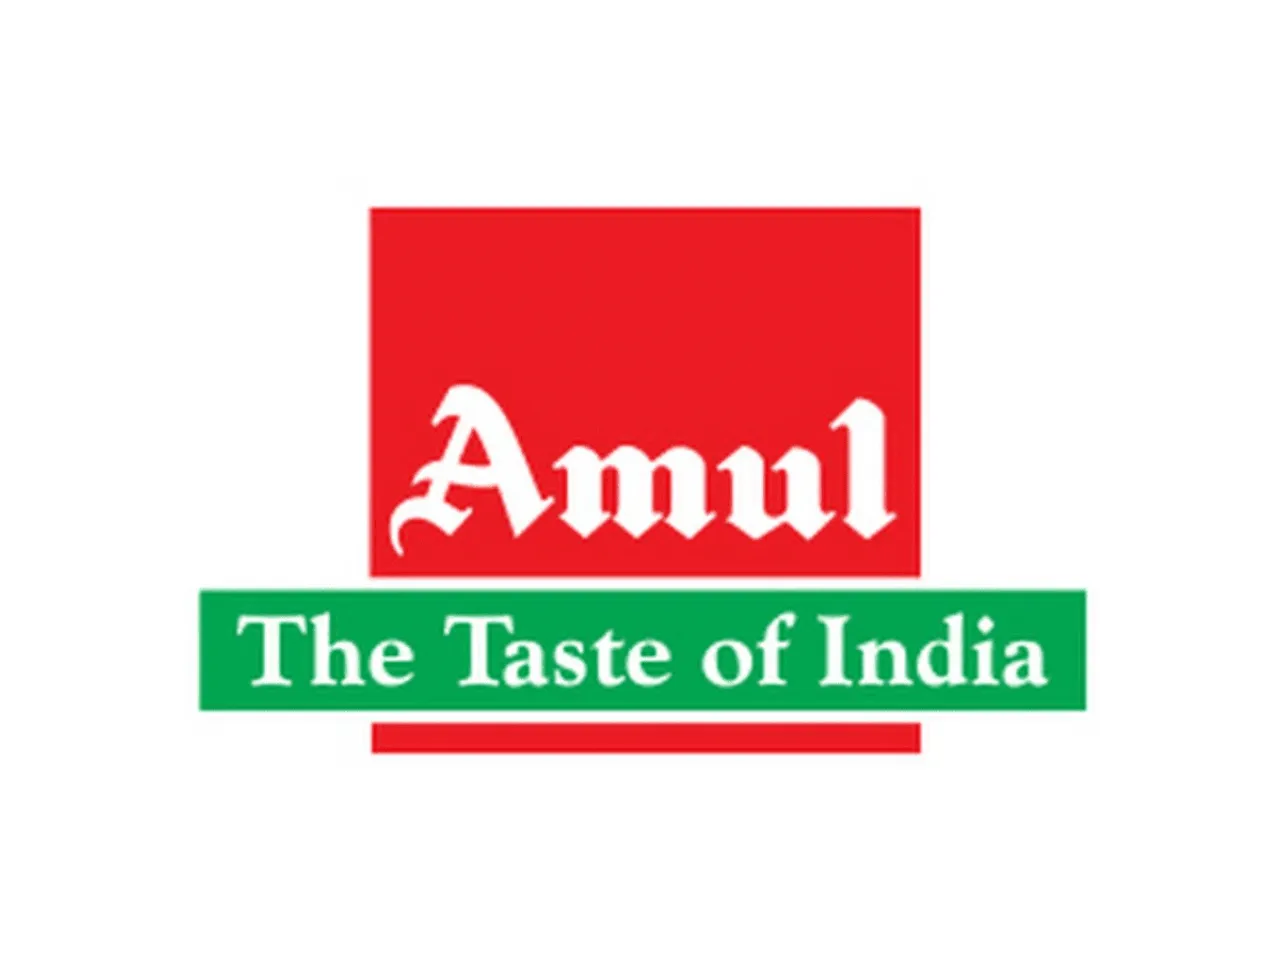 Shamal Patel re-elected as chairman of GCMMF that market Amul products